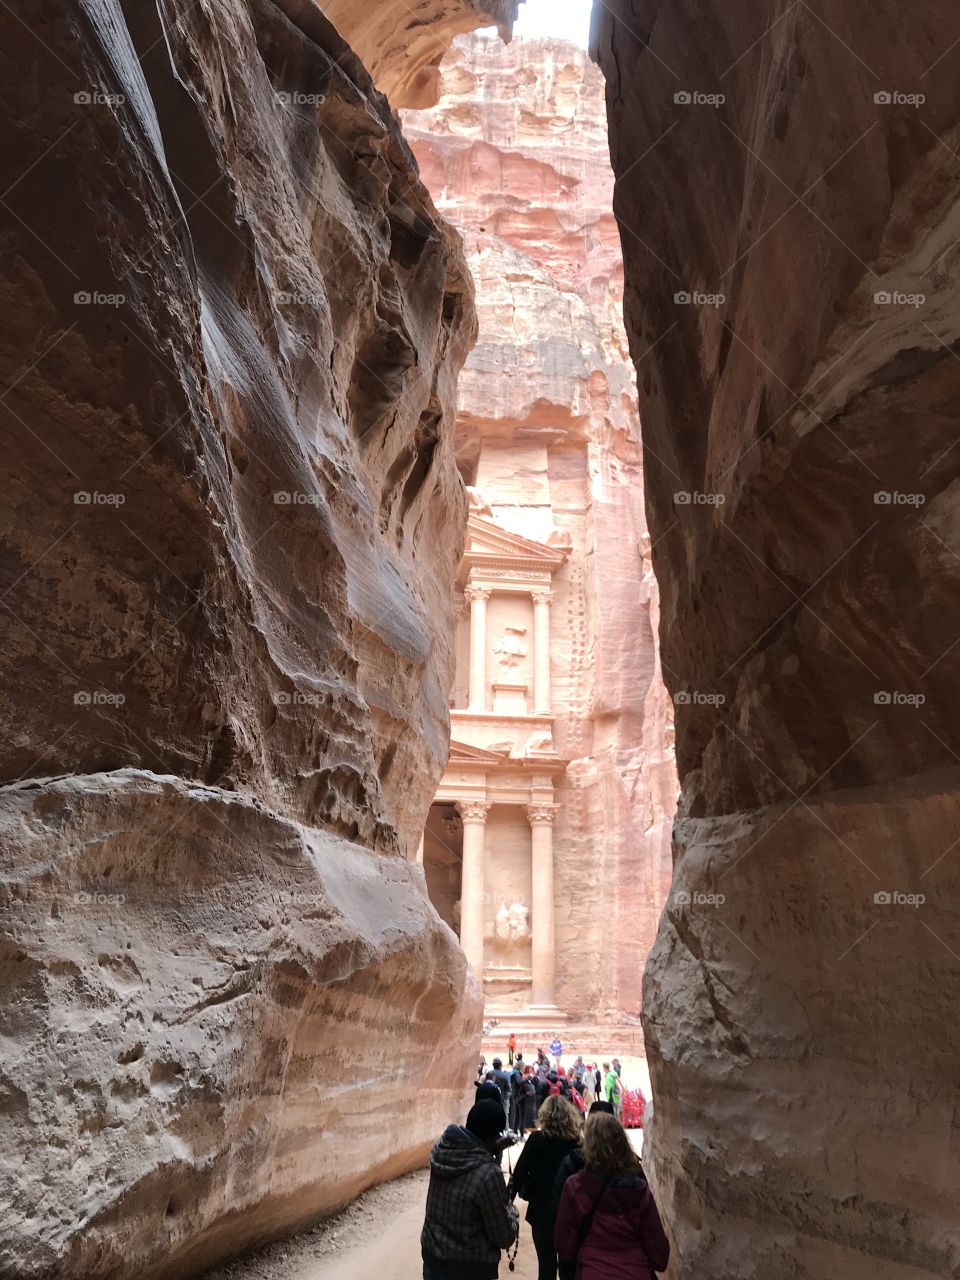 The majestic treasury in Petra, Jordan, which was featured in Indiana Jones and the Last Crusade. 